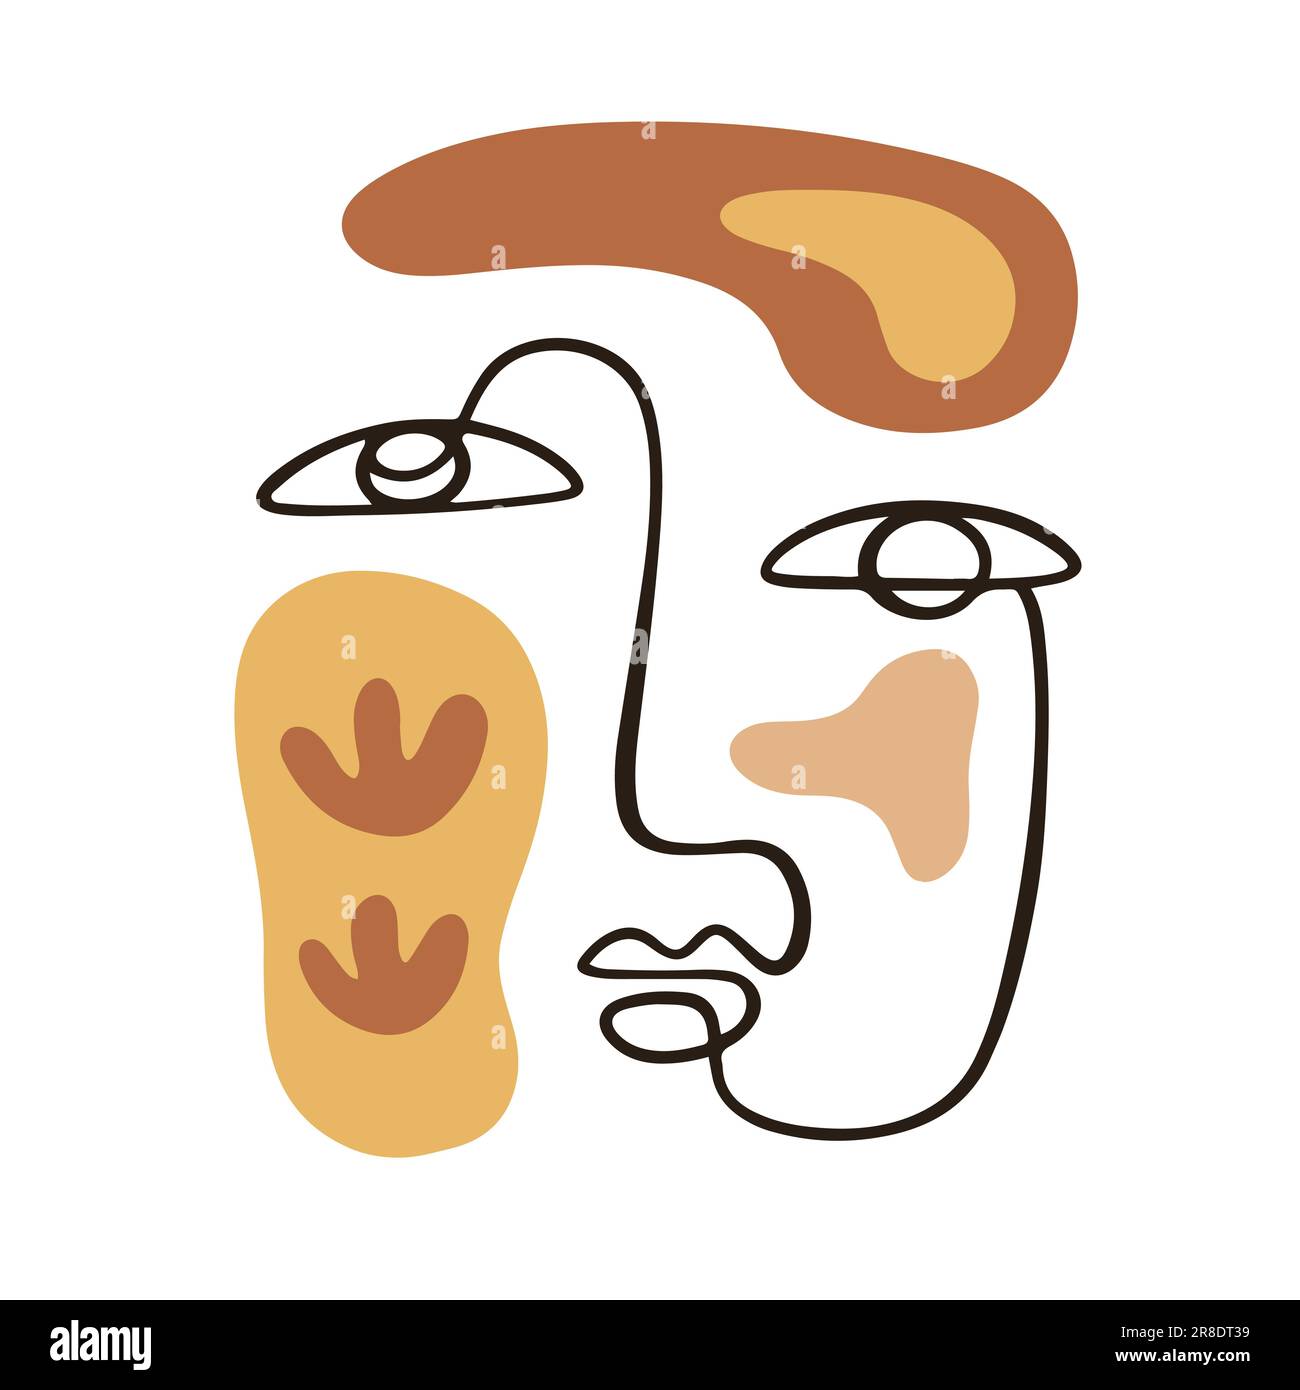 One line drawing human face with organic shapes. Stock Vector